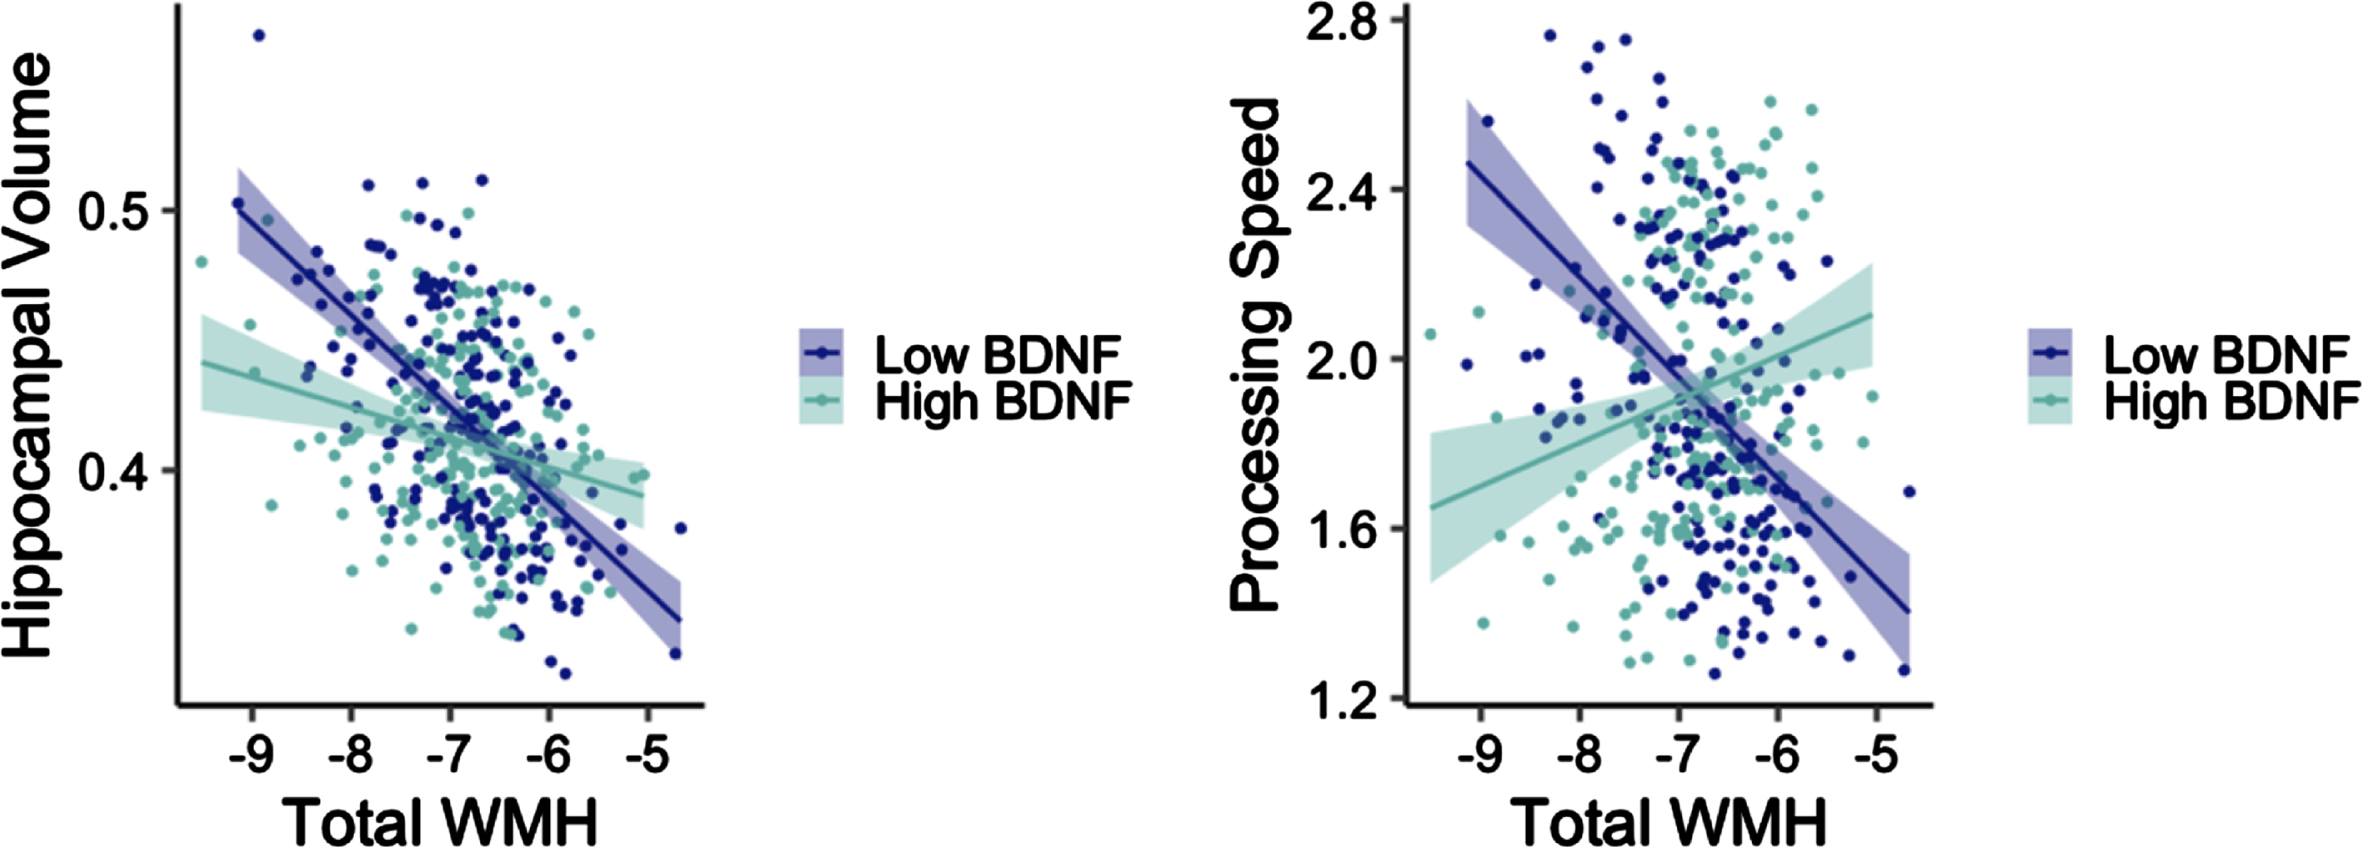 Interactions between WMH volume and BDNF on hippocampal volume (left) and processing speed (right) among older adults without diabetes. Y-axes reflect model-predicted hippocampal volume and processing speed, respectively. X-axes reflect total WMH. Hippocampal volume was normalized by intracranial volume.